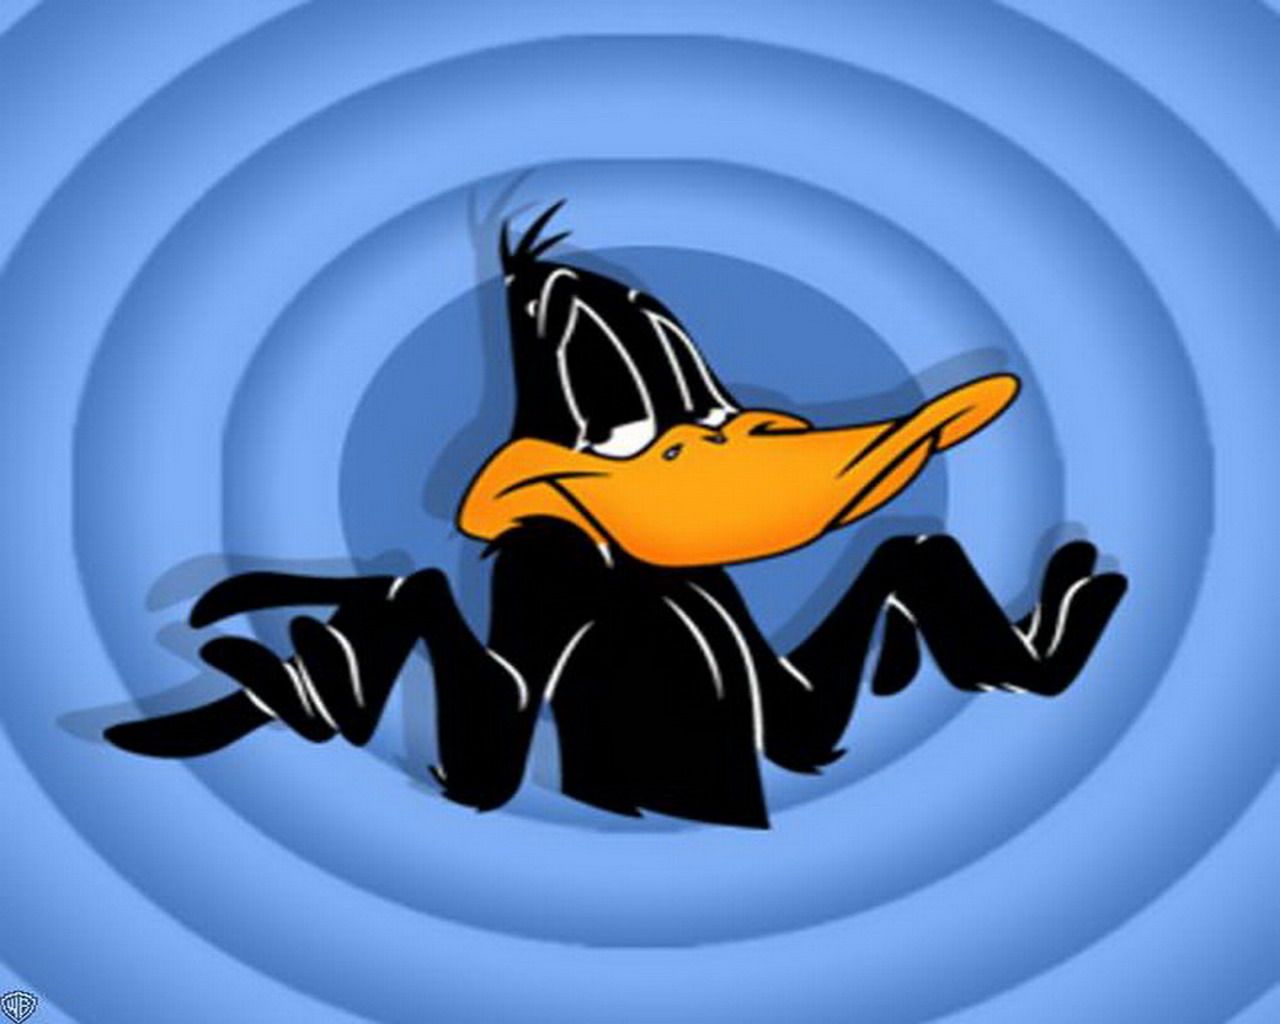 Daffy Duck, one of the most famous Looney Tunes characters, is a yellow duck with a black body and orange beak. - Looney Tunes